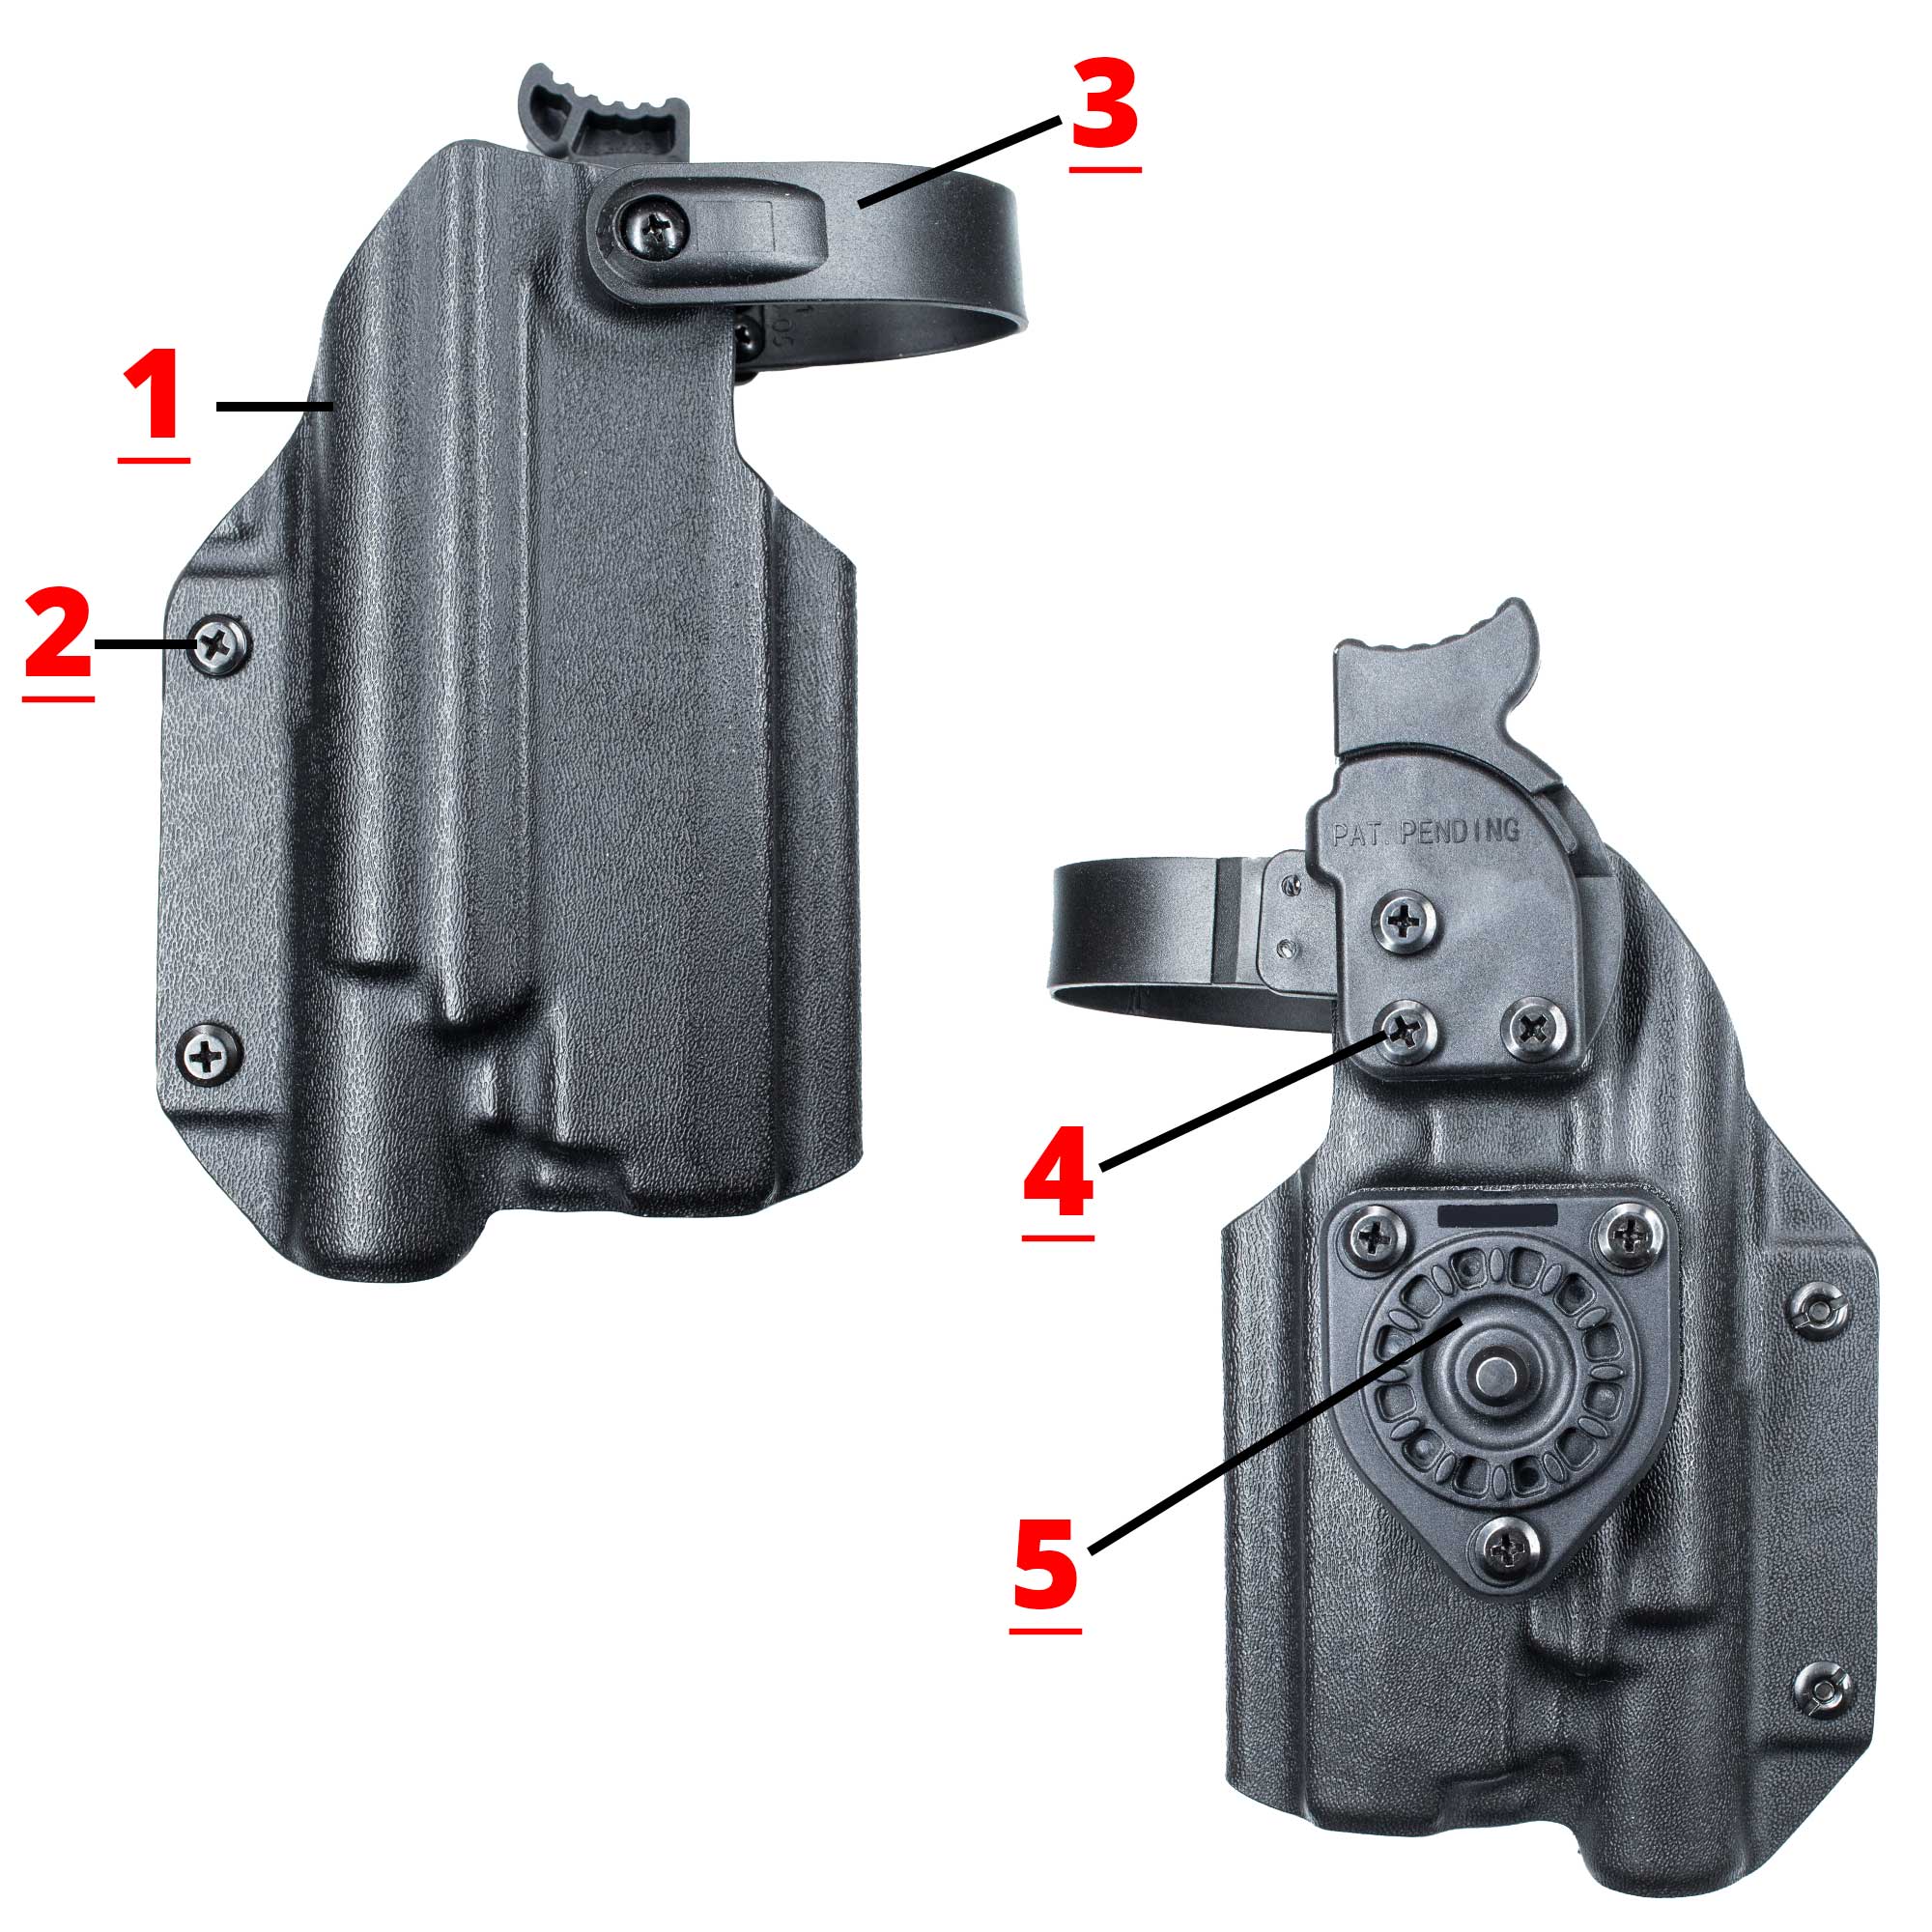 Level II Duty Holster Hardware Replacement Kits